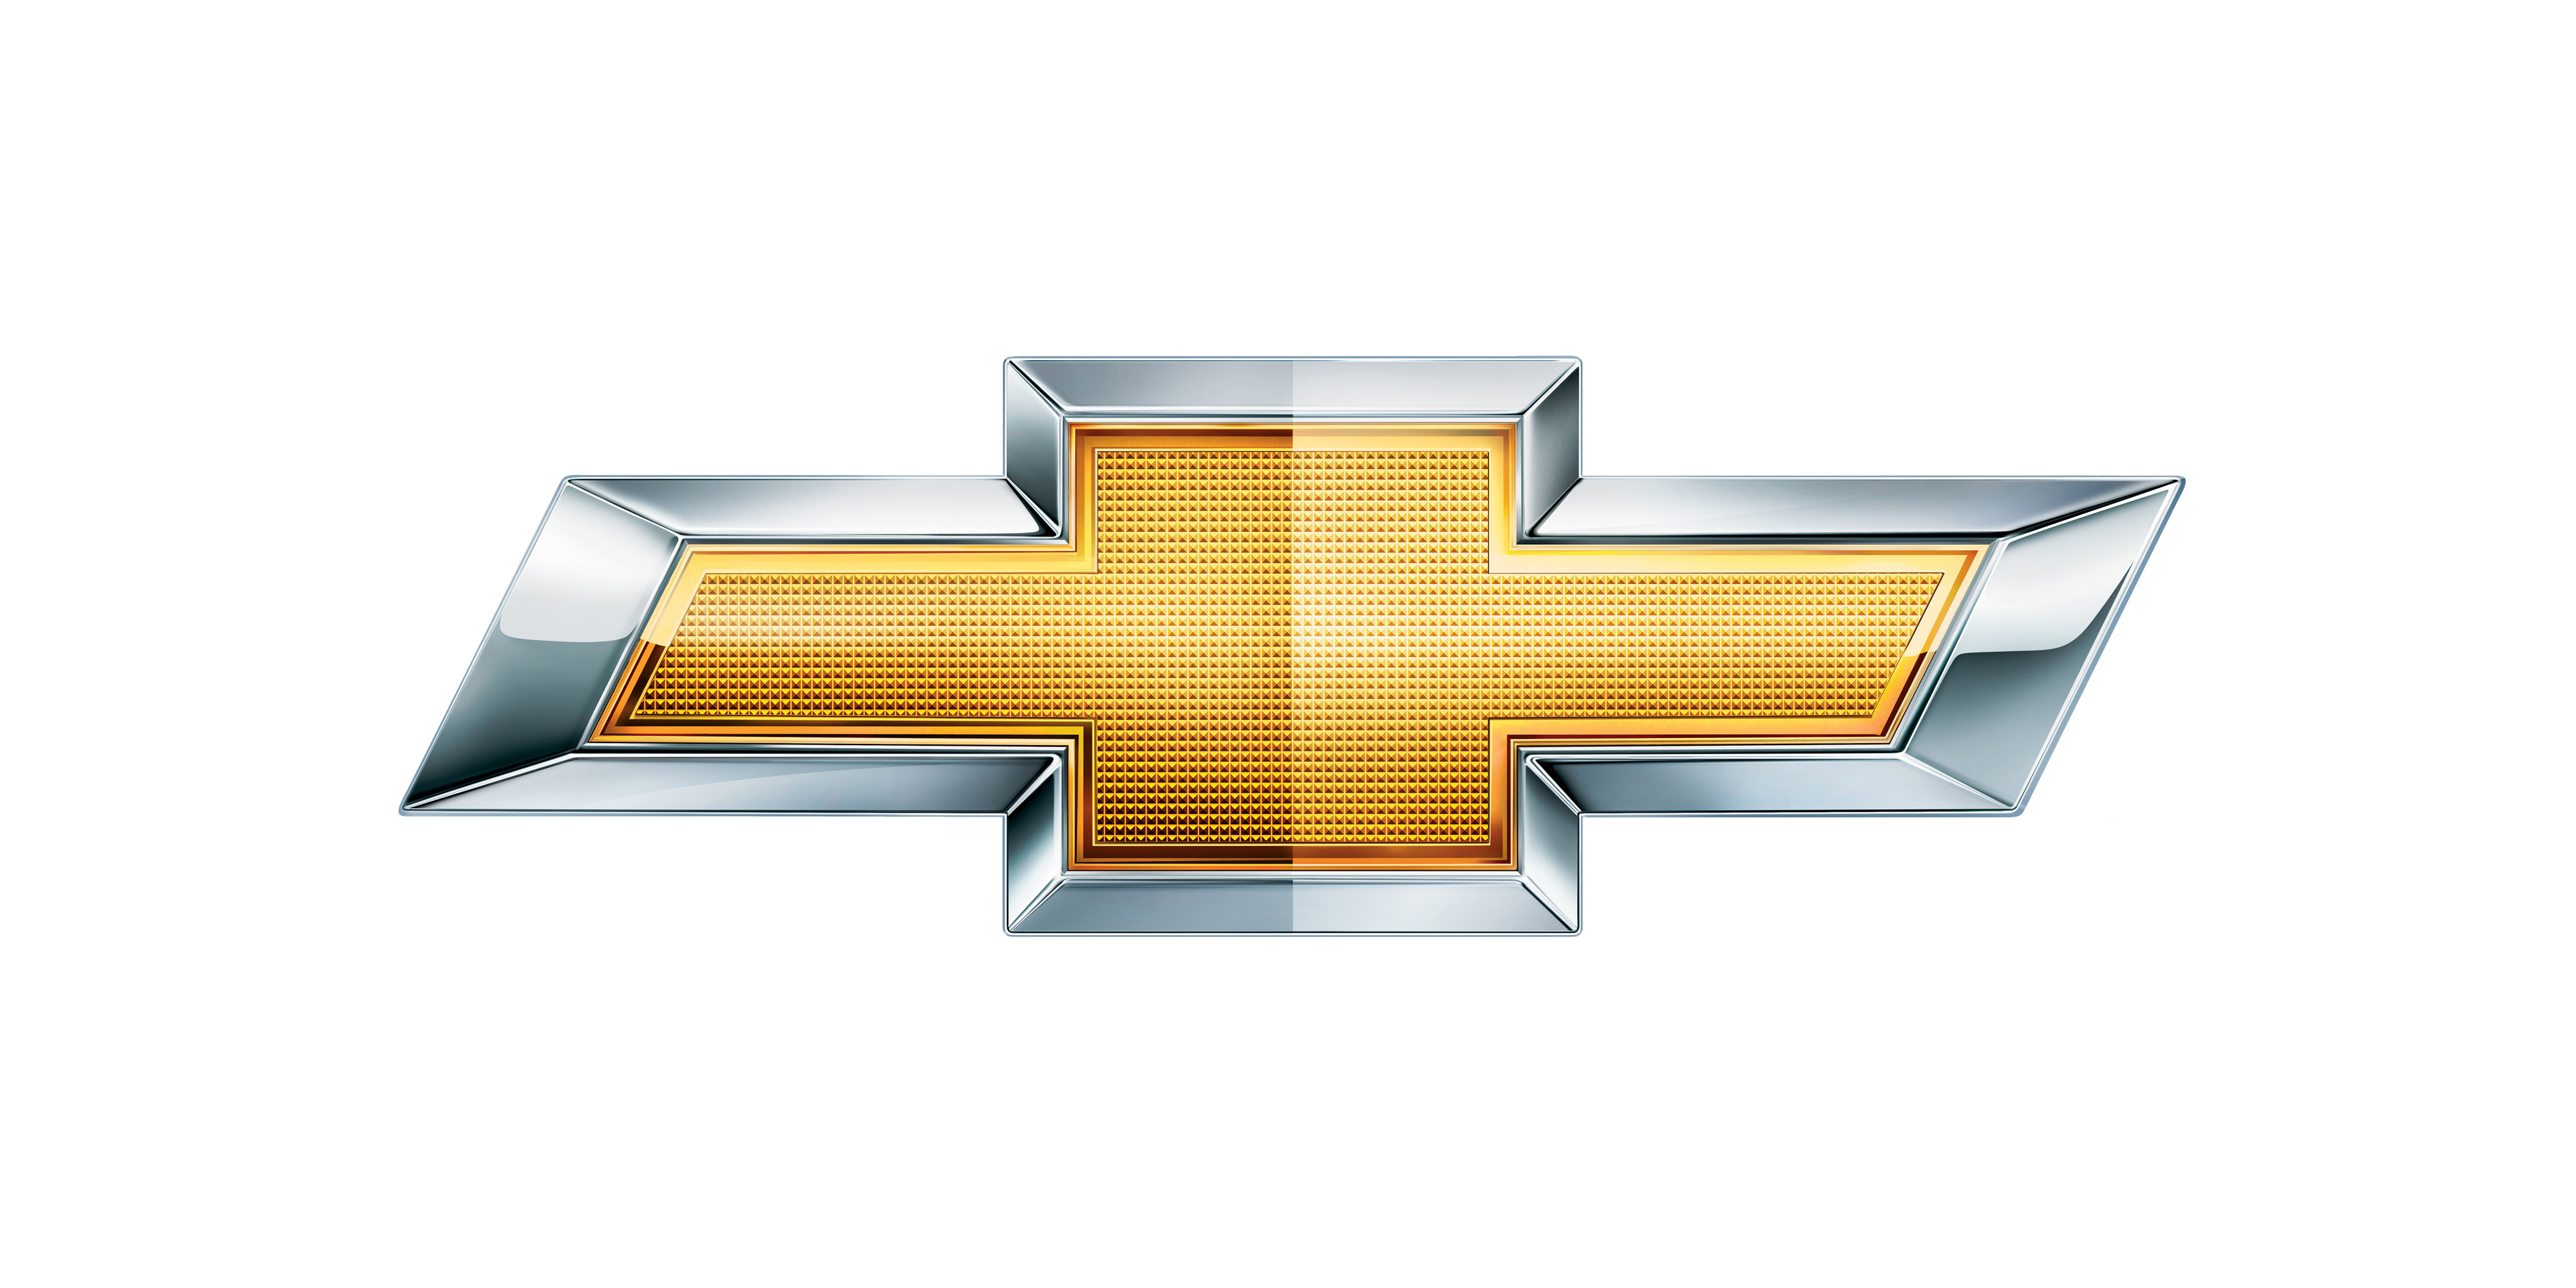 Chevy logo chevrolet car symbol meaning and history brand jpg